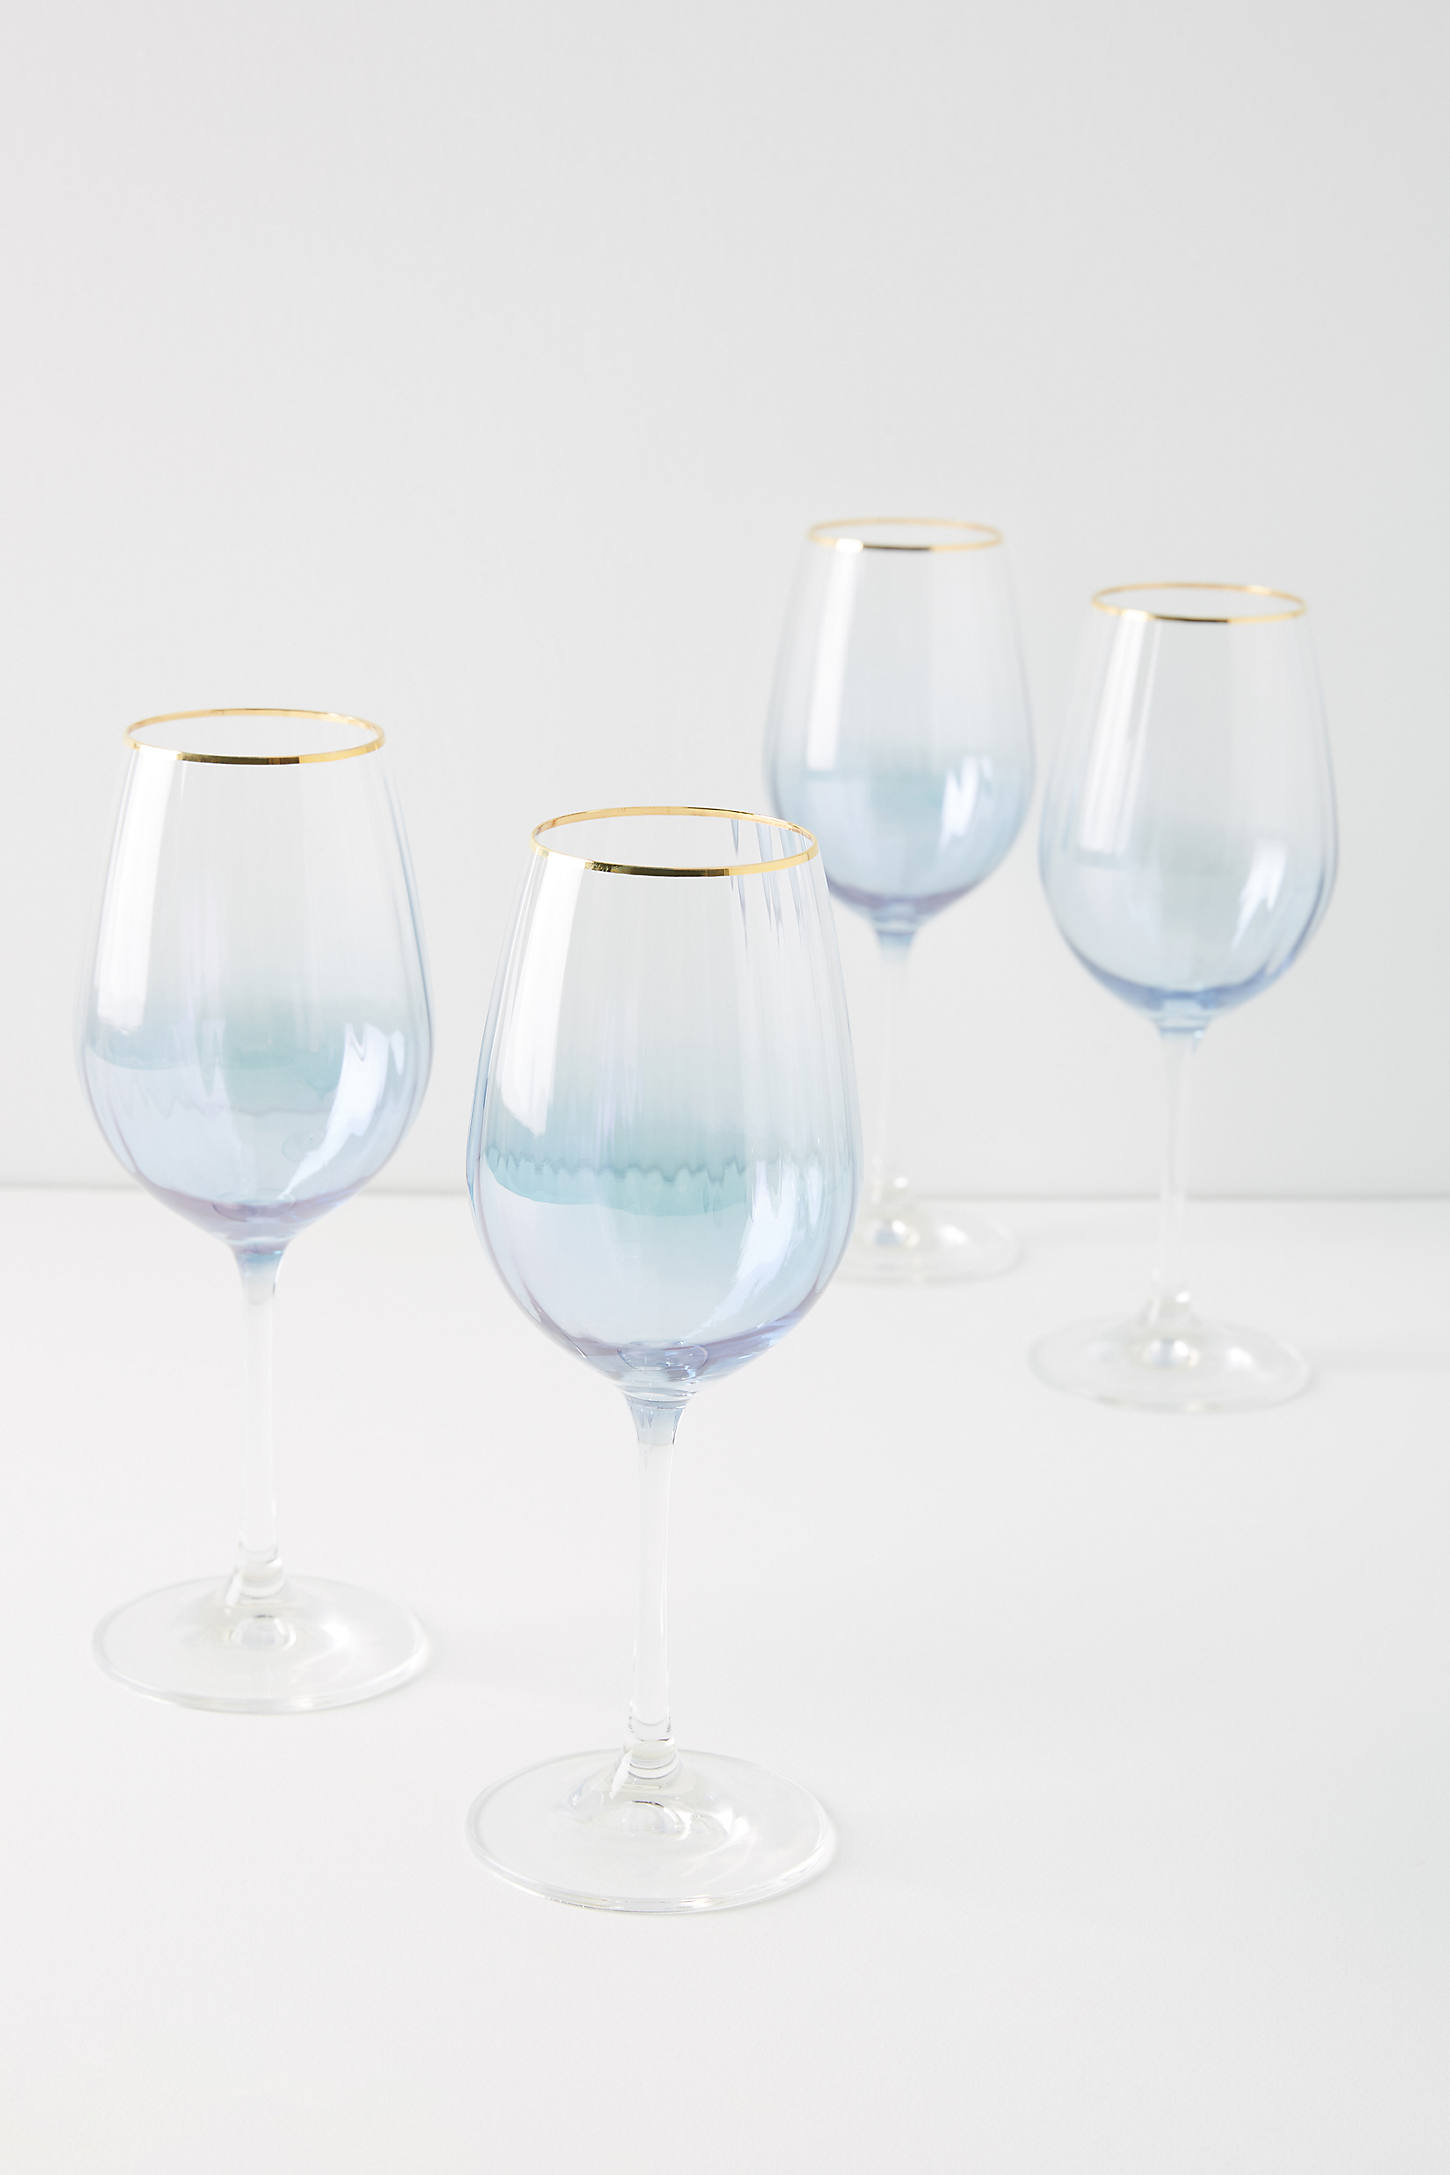 Waterfall Red Wine Glasses, Set of 4  Anthropologie Japan - Women's  Clothing, Accessories & Home